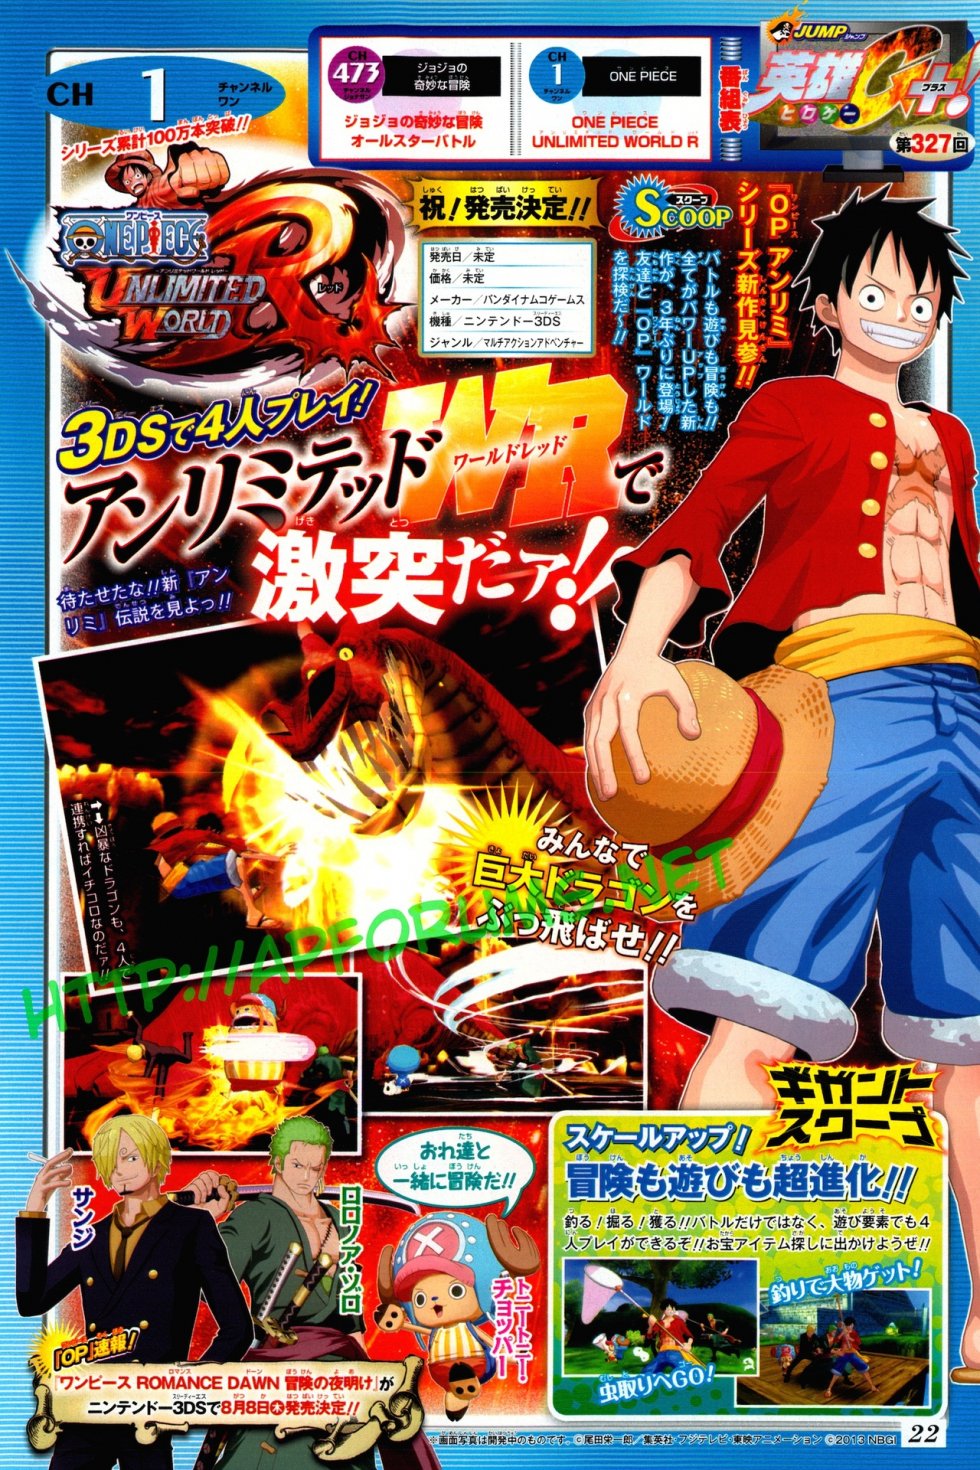 One-Piece-Unlimited-World-Red_23-05-2013_scan